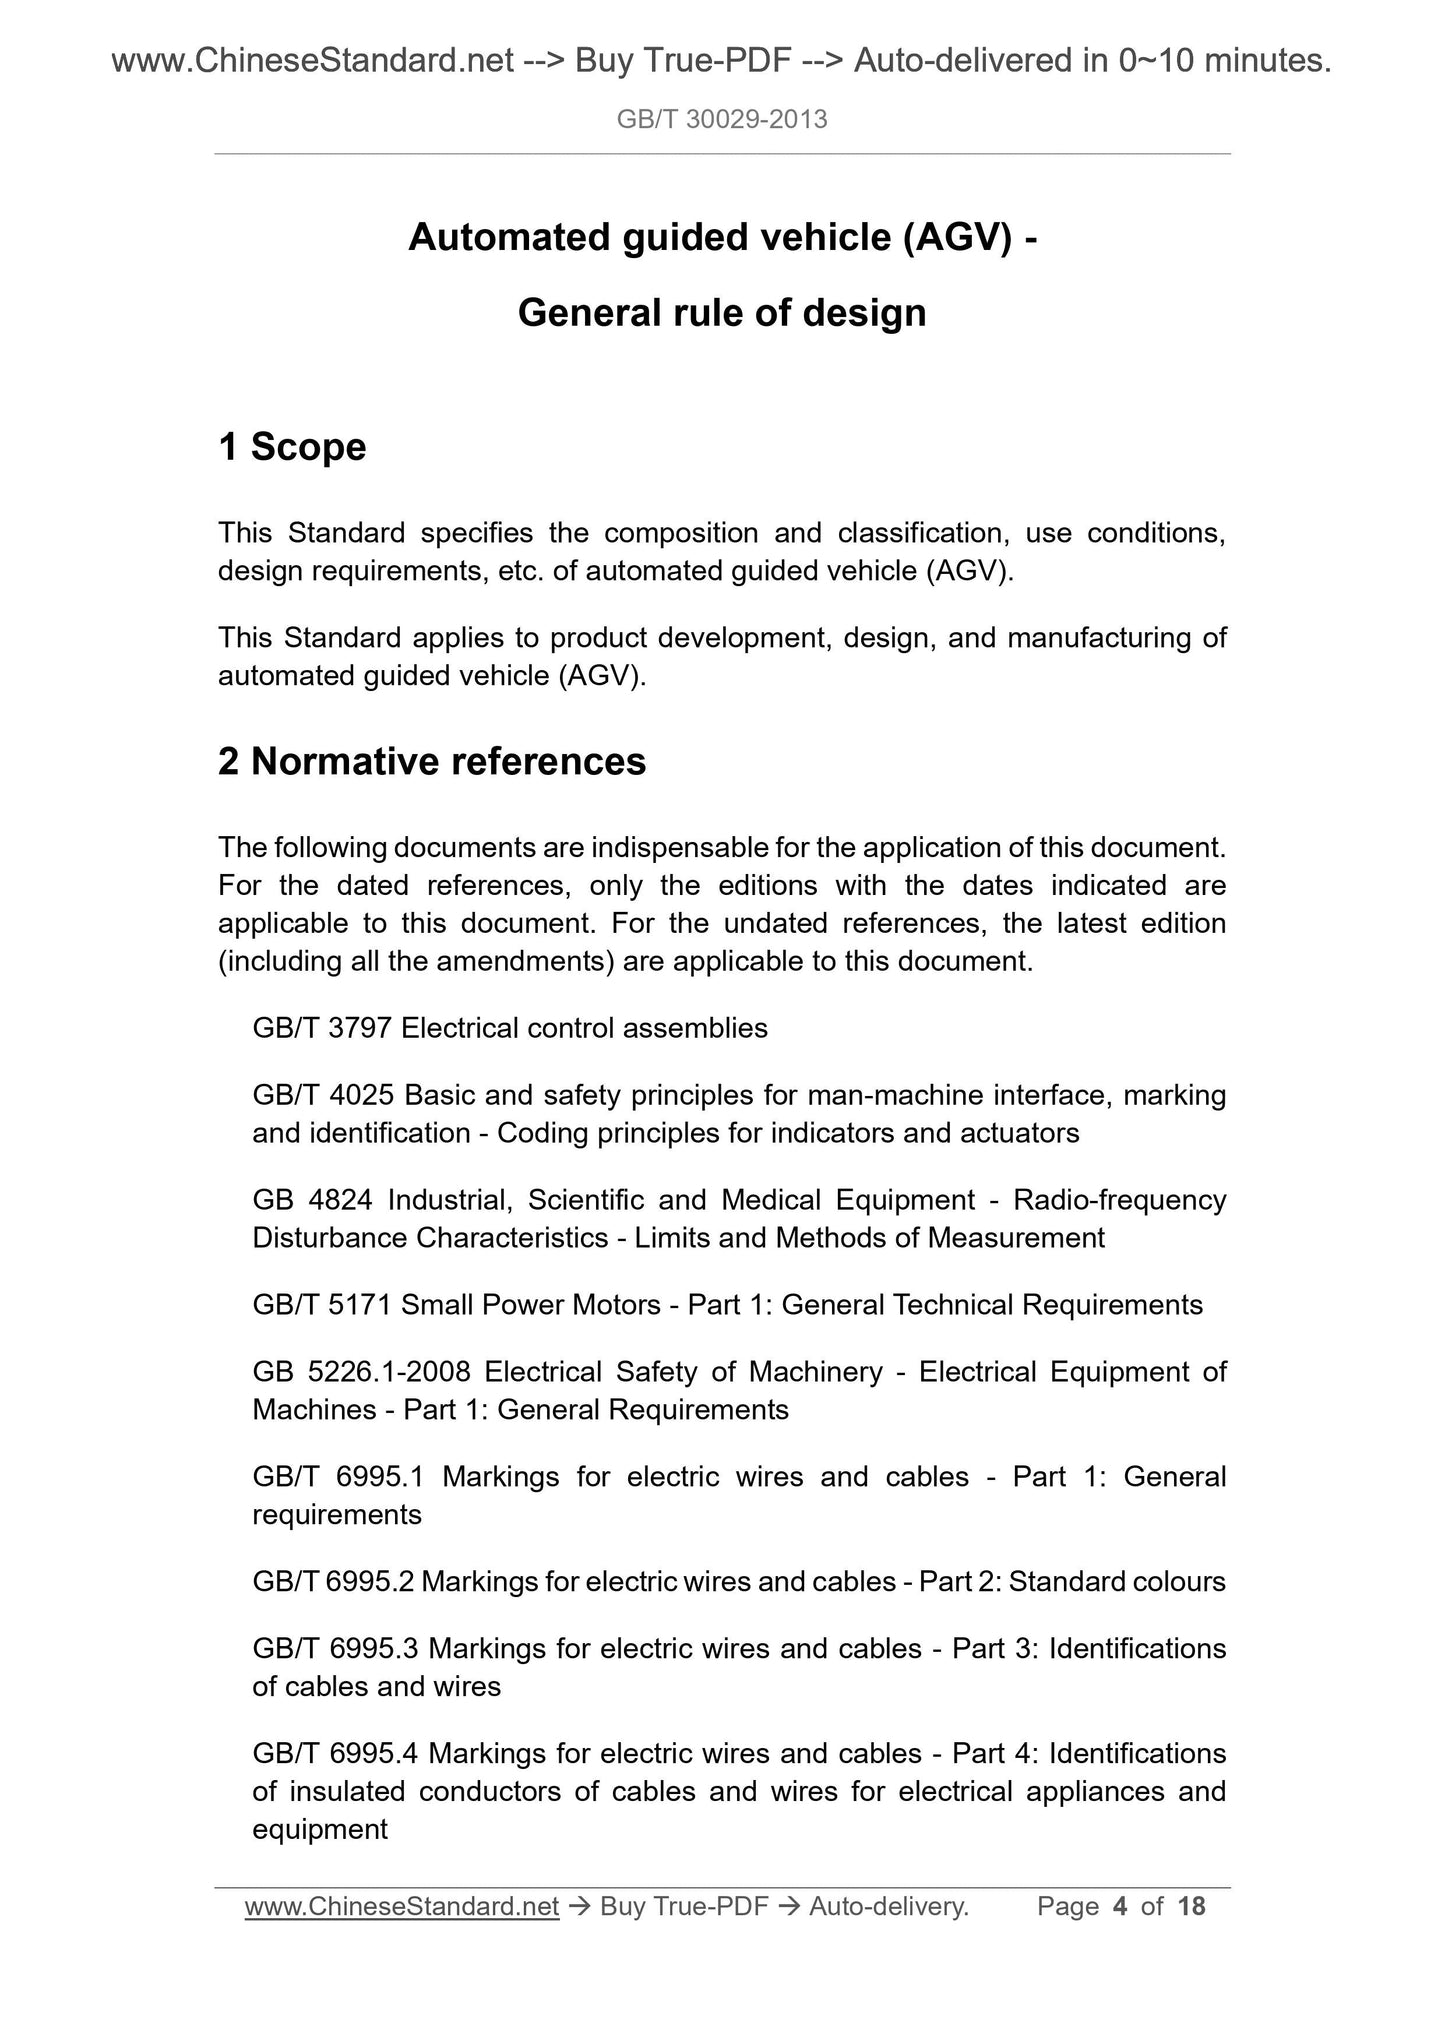 GB/T 30029-2013 Page 3